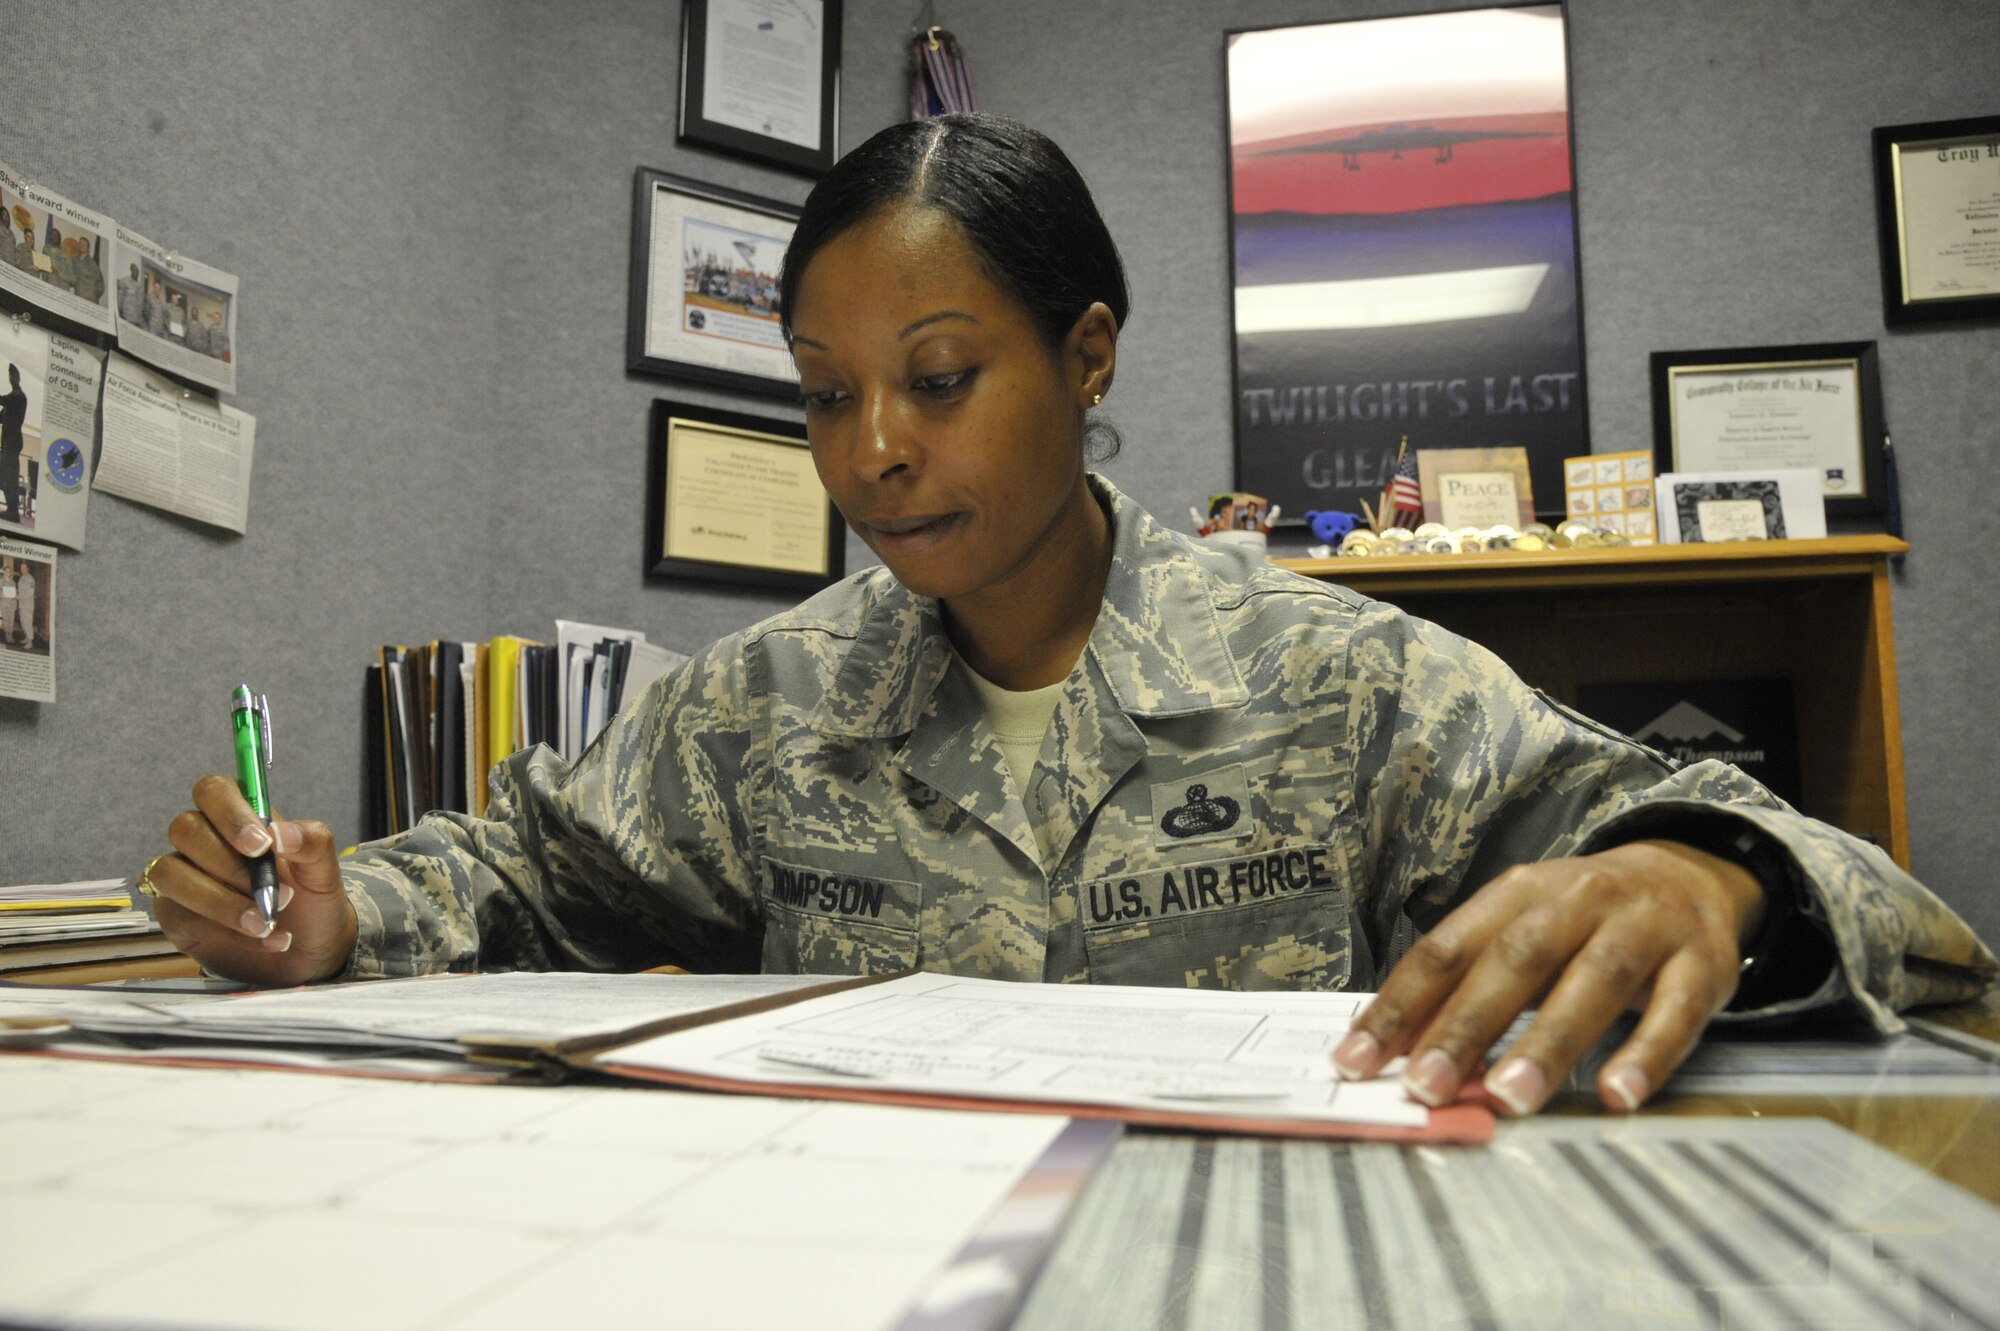 Master Sgt. Lafoundra Thompson, 509th Operations Group first sergeant, reviews a family care plan at Whiteman Air Force Base, Mo., July 16, 2013. First sergeants review family care plans and powers of attorney quarterly to make sure they are current and realistic. (U.S. Air Force photo by Airman 1st Class Keenan Berry/Released)